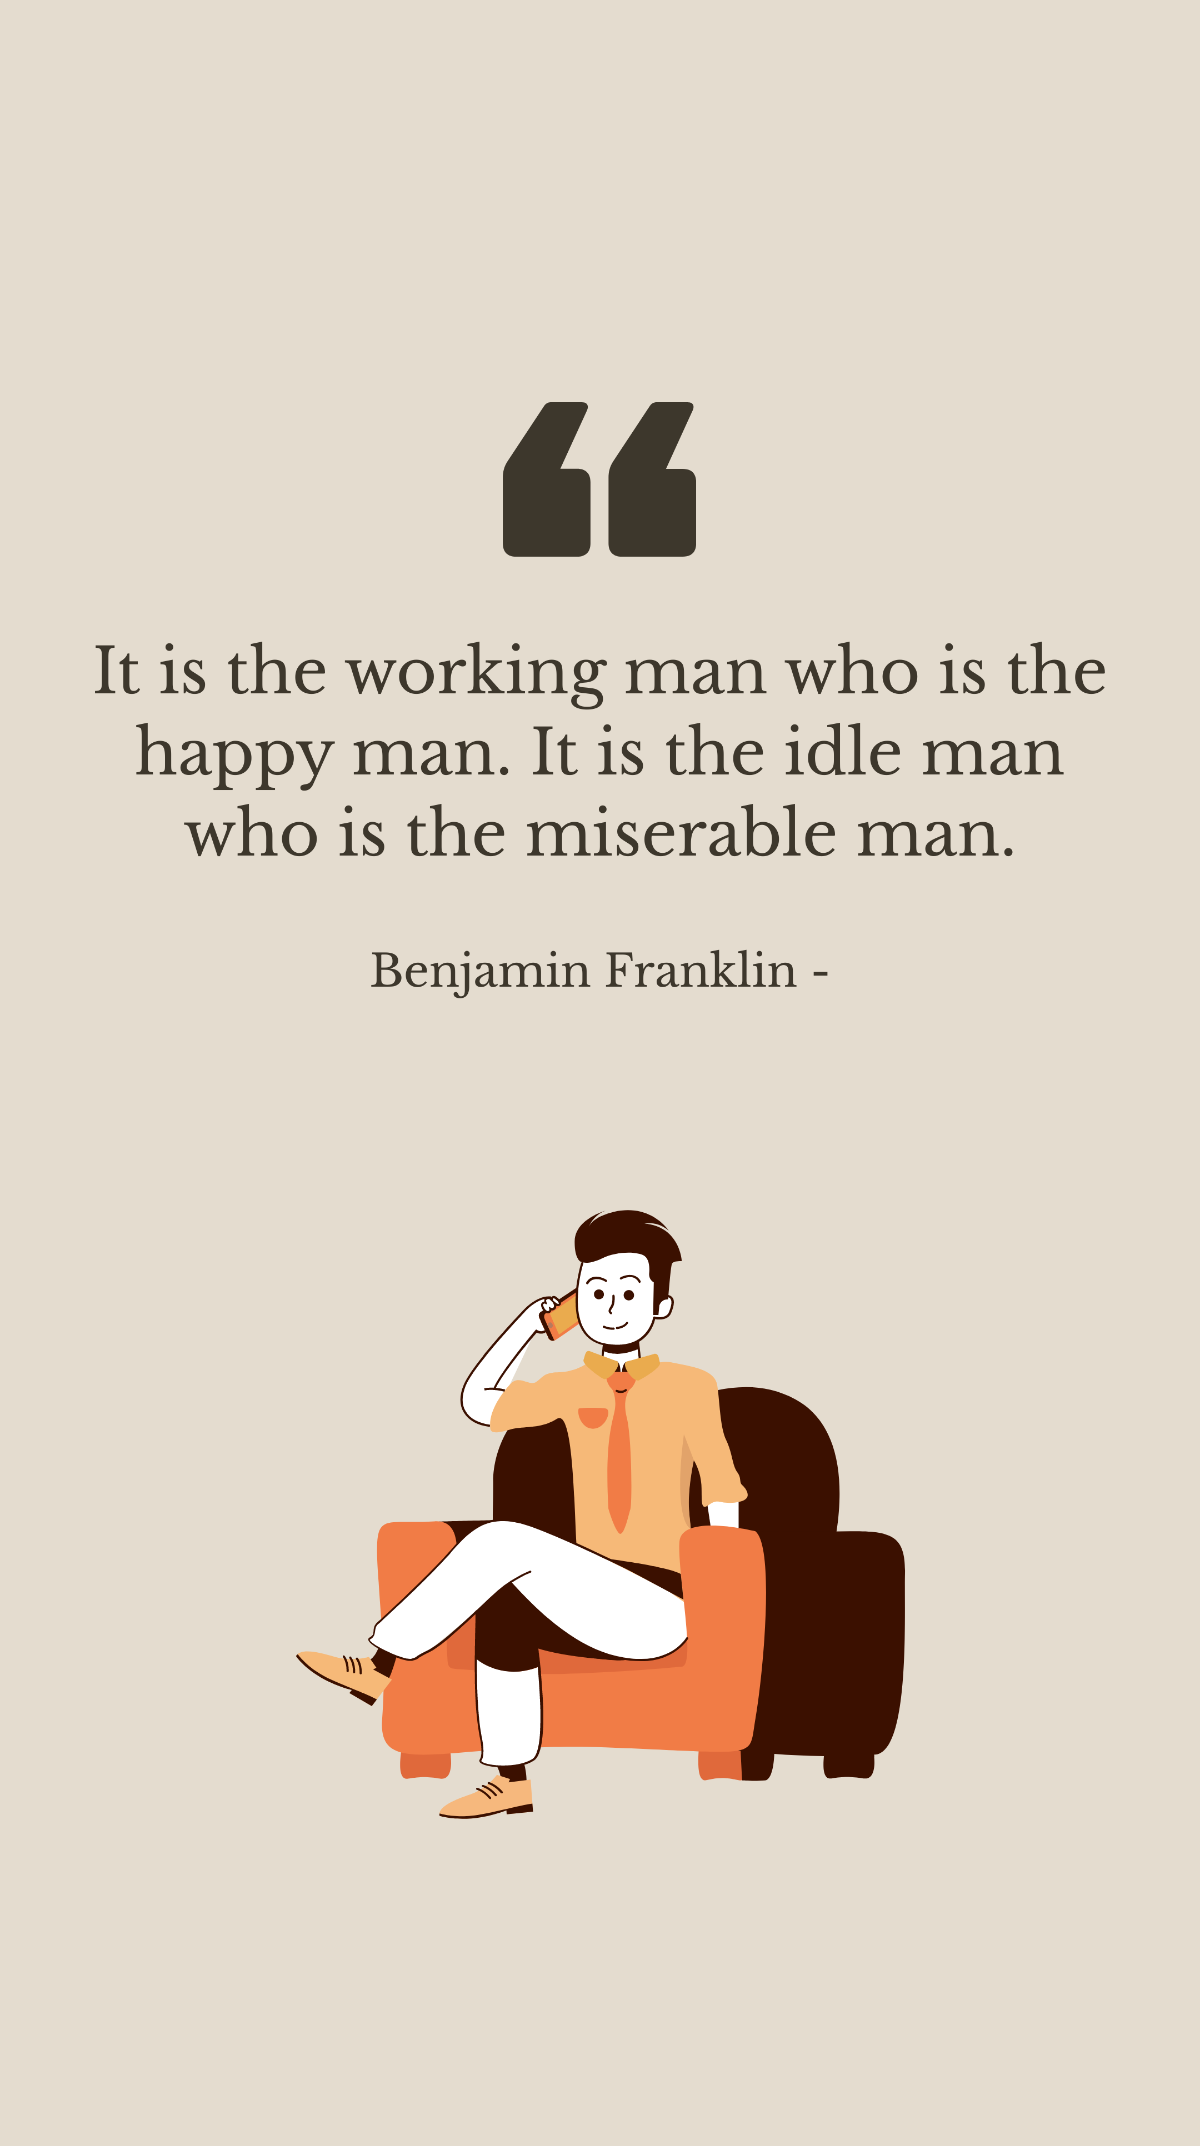 Benjamin Franklin - It is the working man who is the happy man. It is the idle man who is the miserable man.